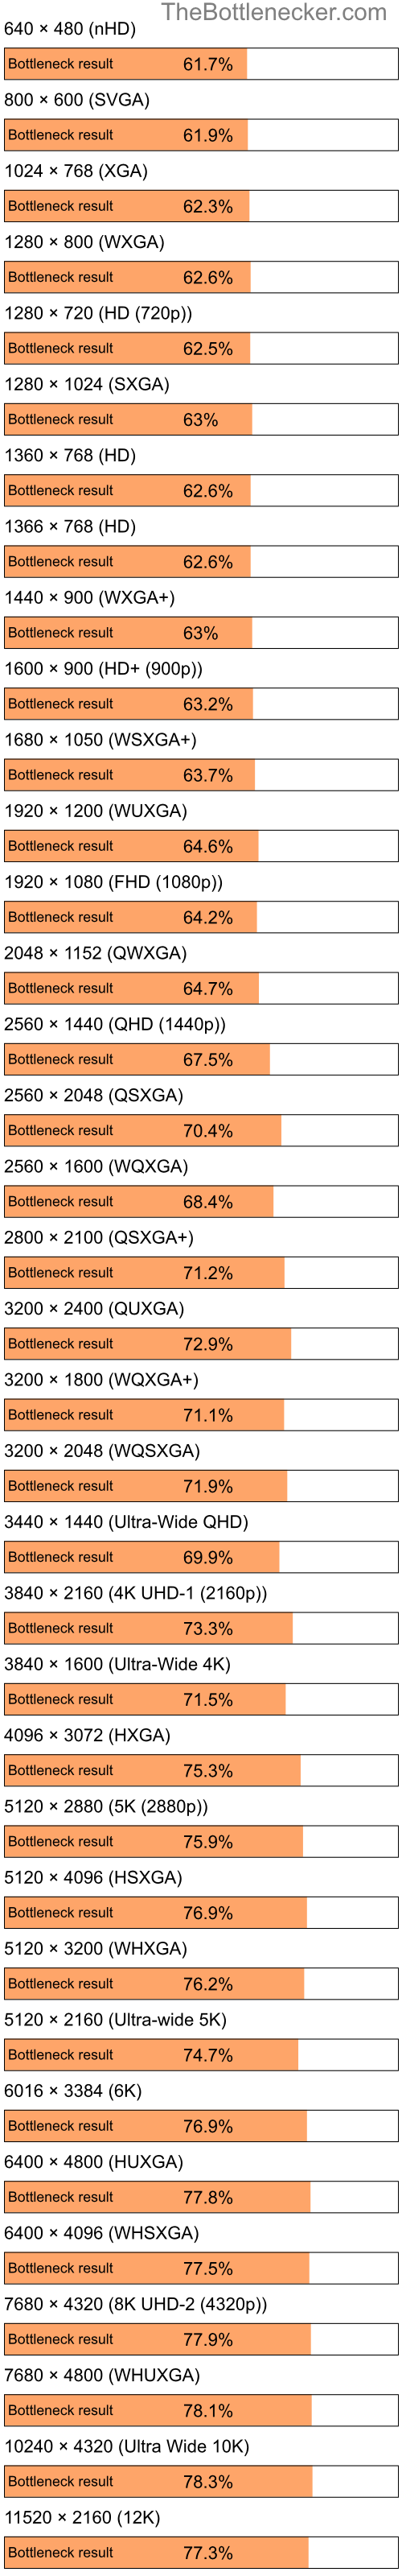 Bottleneck results by resolution for Intel Pentium 4 and AMD Mobility Radeon HD 4200 in7 Days to Die